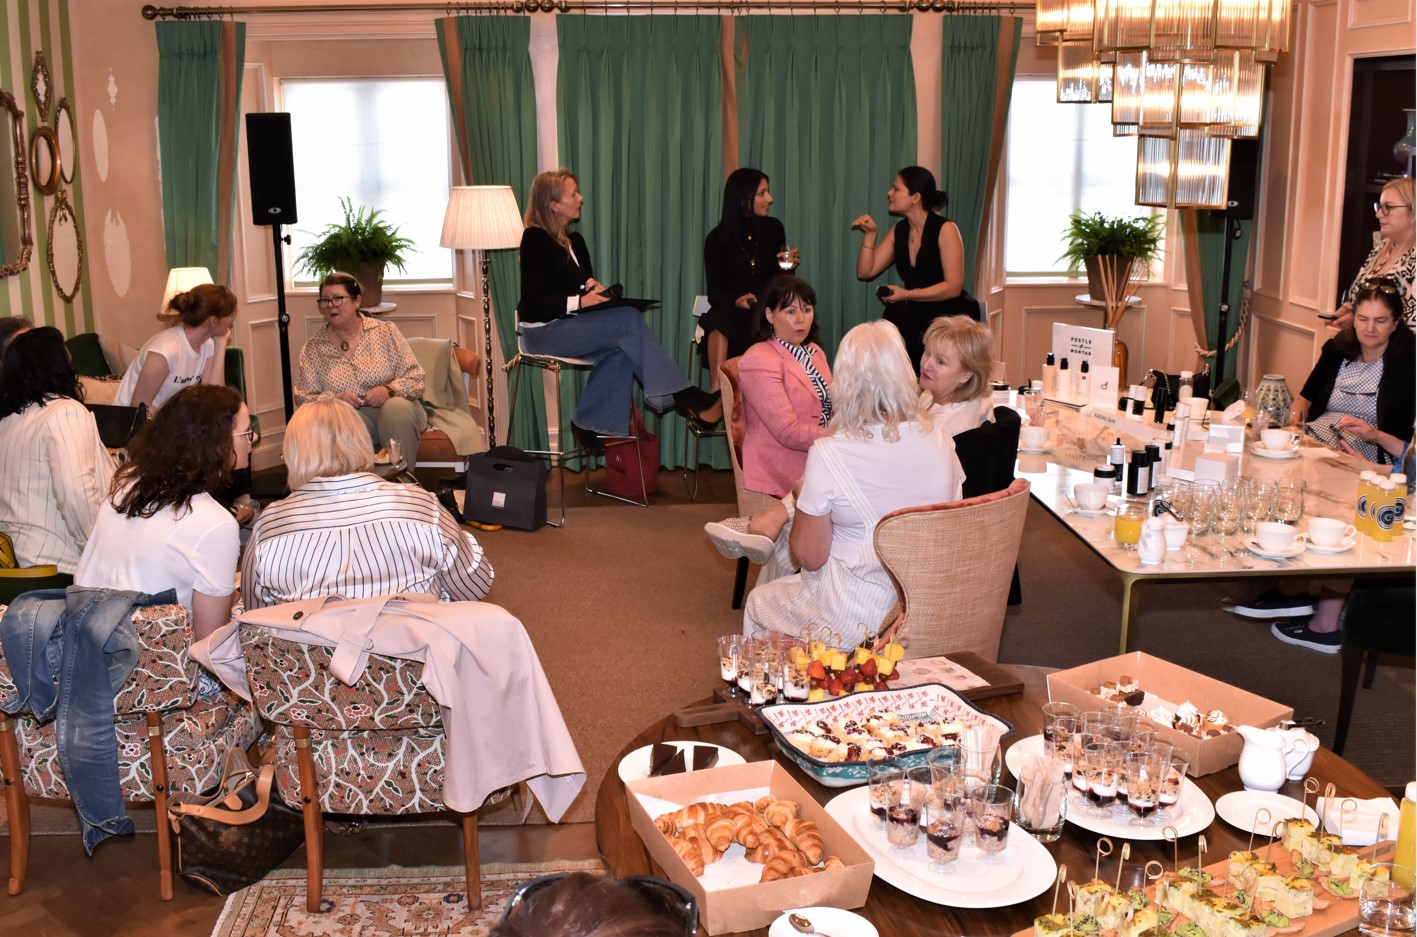 Beauty and wellness experts in conversation at Kildare Village